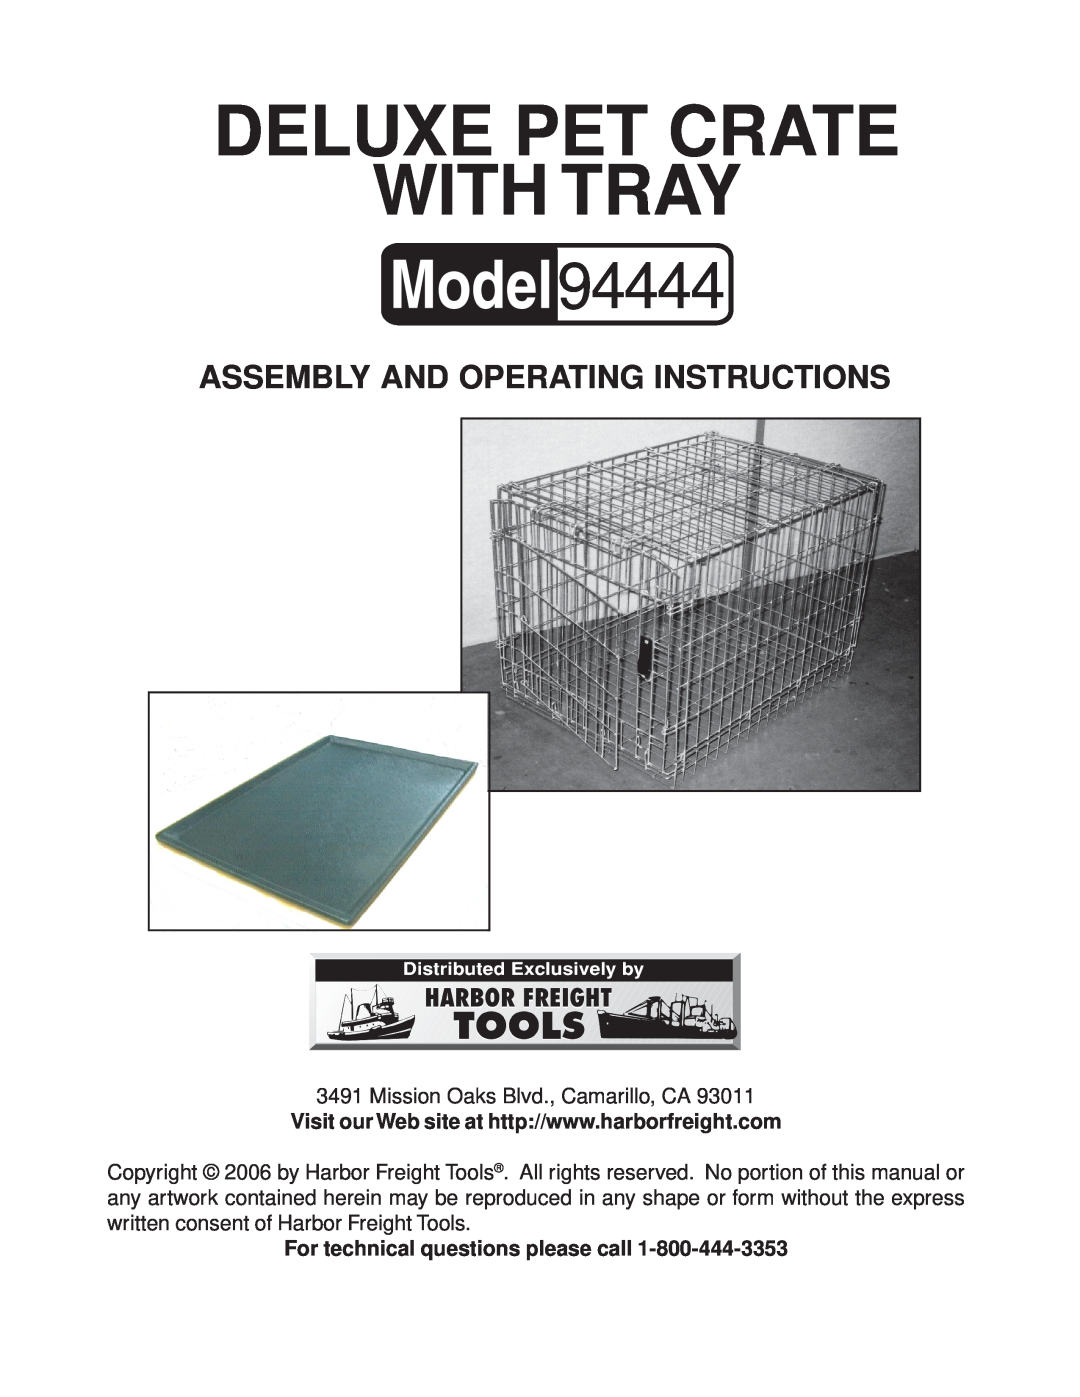 Harbor Freight Tools Deluxe Pet Crate with Tray manual Deluxe Pet Crate With Tray, 94444 